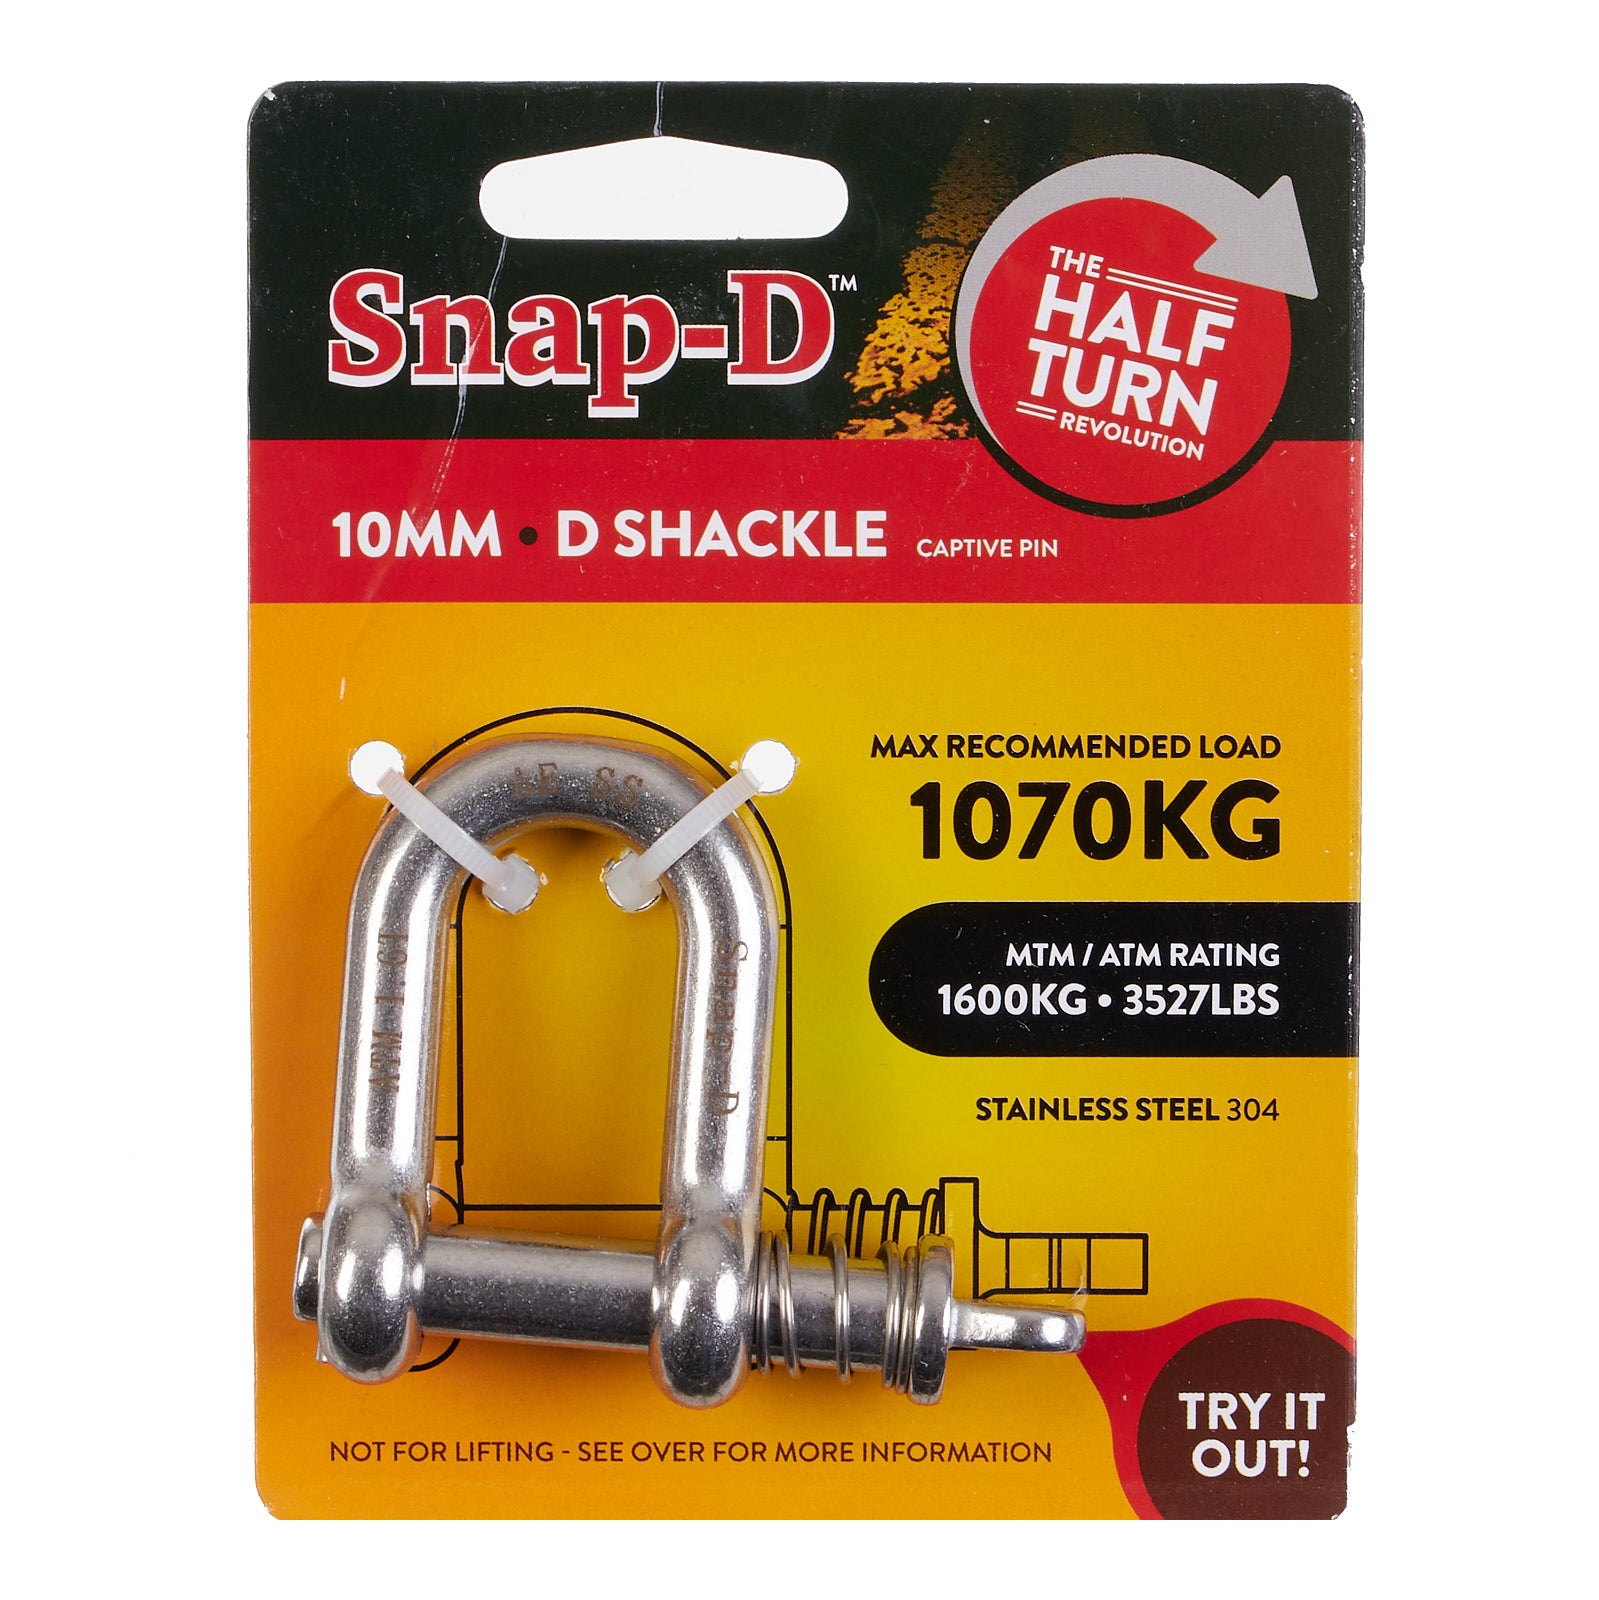 New SNAP-D Stainless Steel D-Shackle - 10mm #SD10DSS